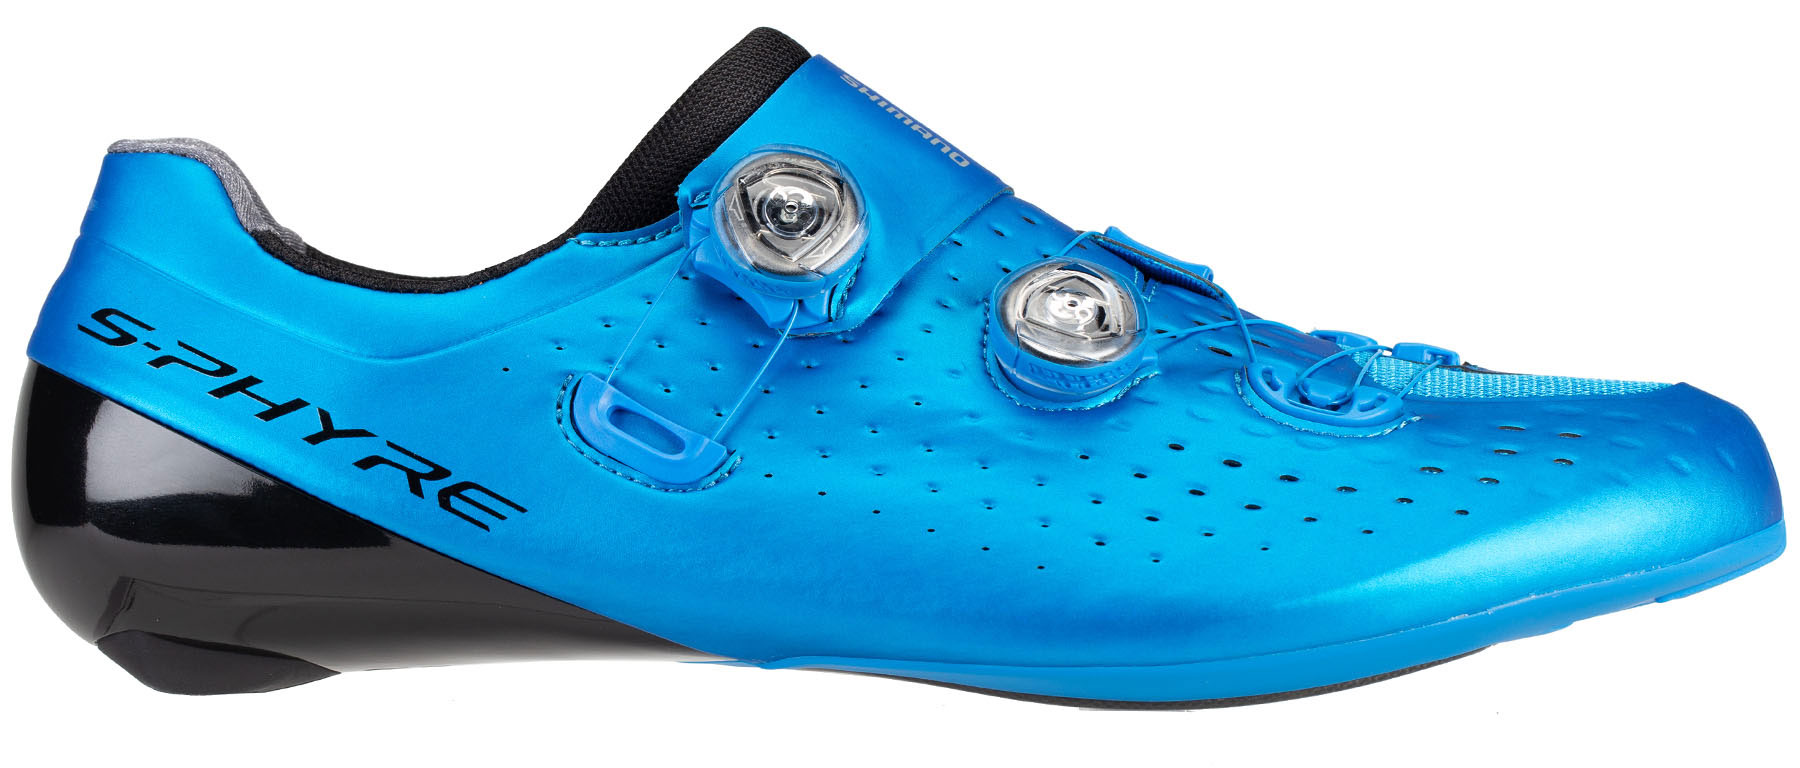 Shimano SH-RC9 S-Phyre Road Shoes Excel Sports | Shop Online From Colorado